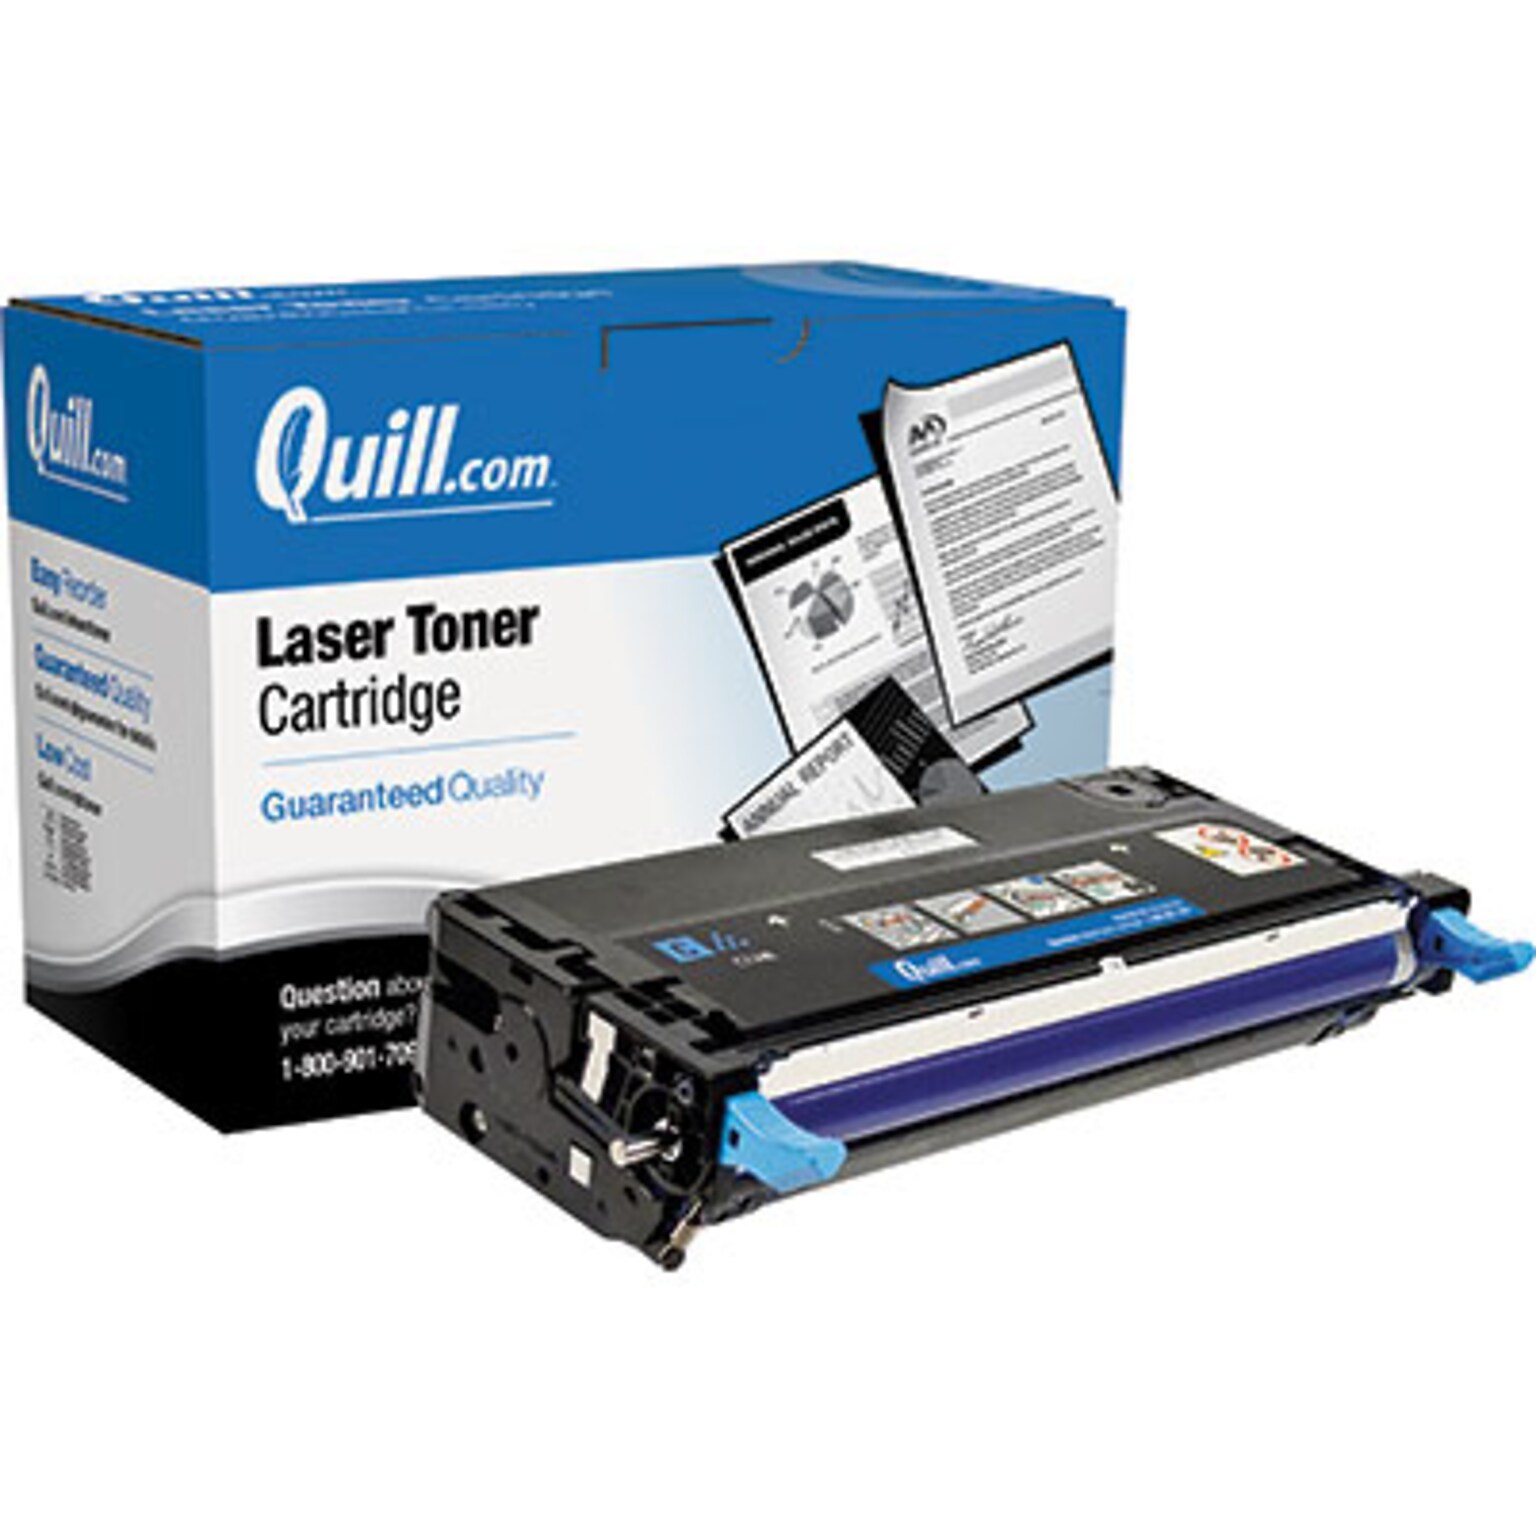 Quill Brand Remanufactured Laser Toner Cartridge Comparable to Dell H513C High Yield Cyan (100% Satisfaction Guaranteed)